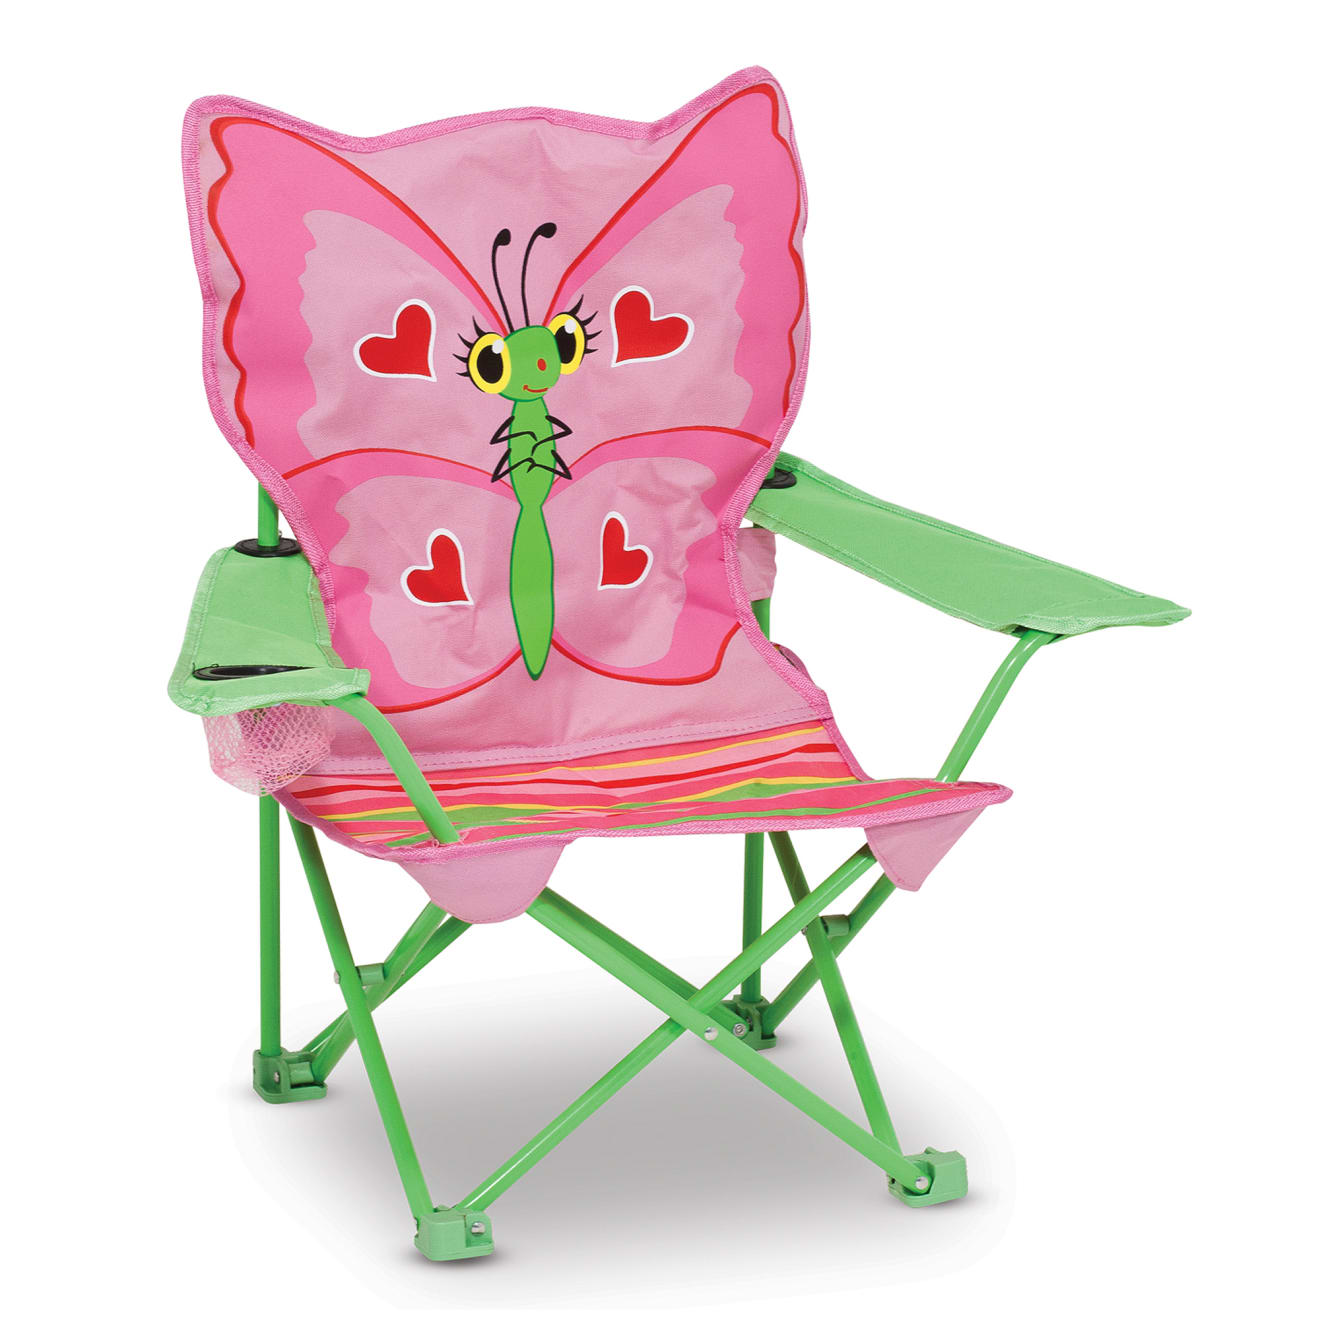 Bella Butterfly Child's Outdoor Chair